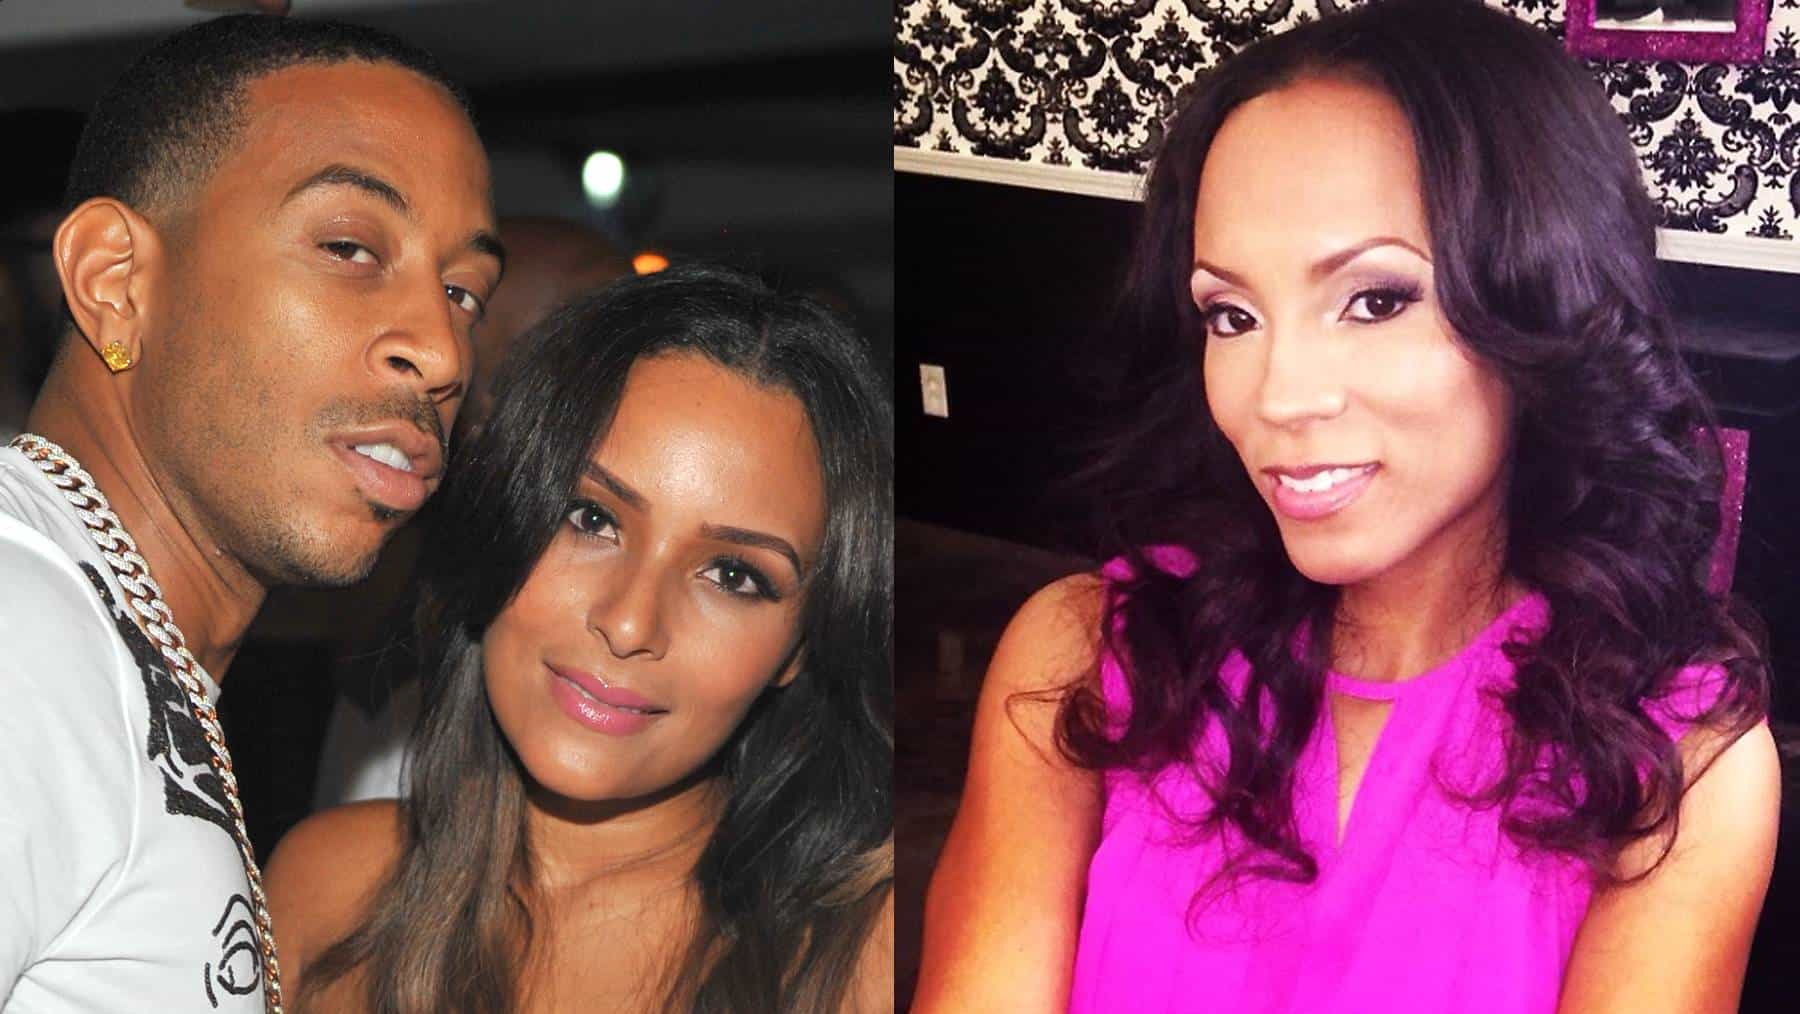 Ludacris with his wife and Tamika Fuller, his former friend